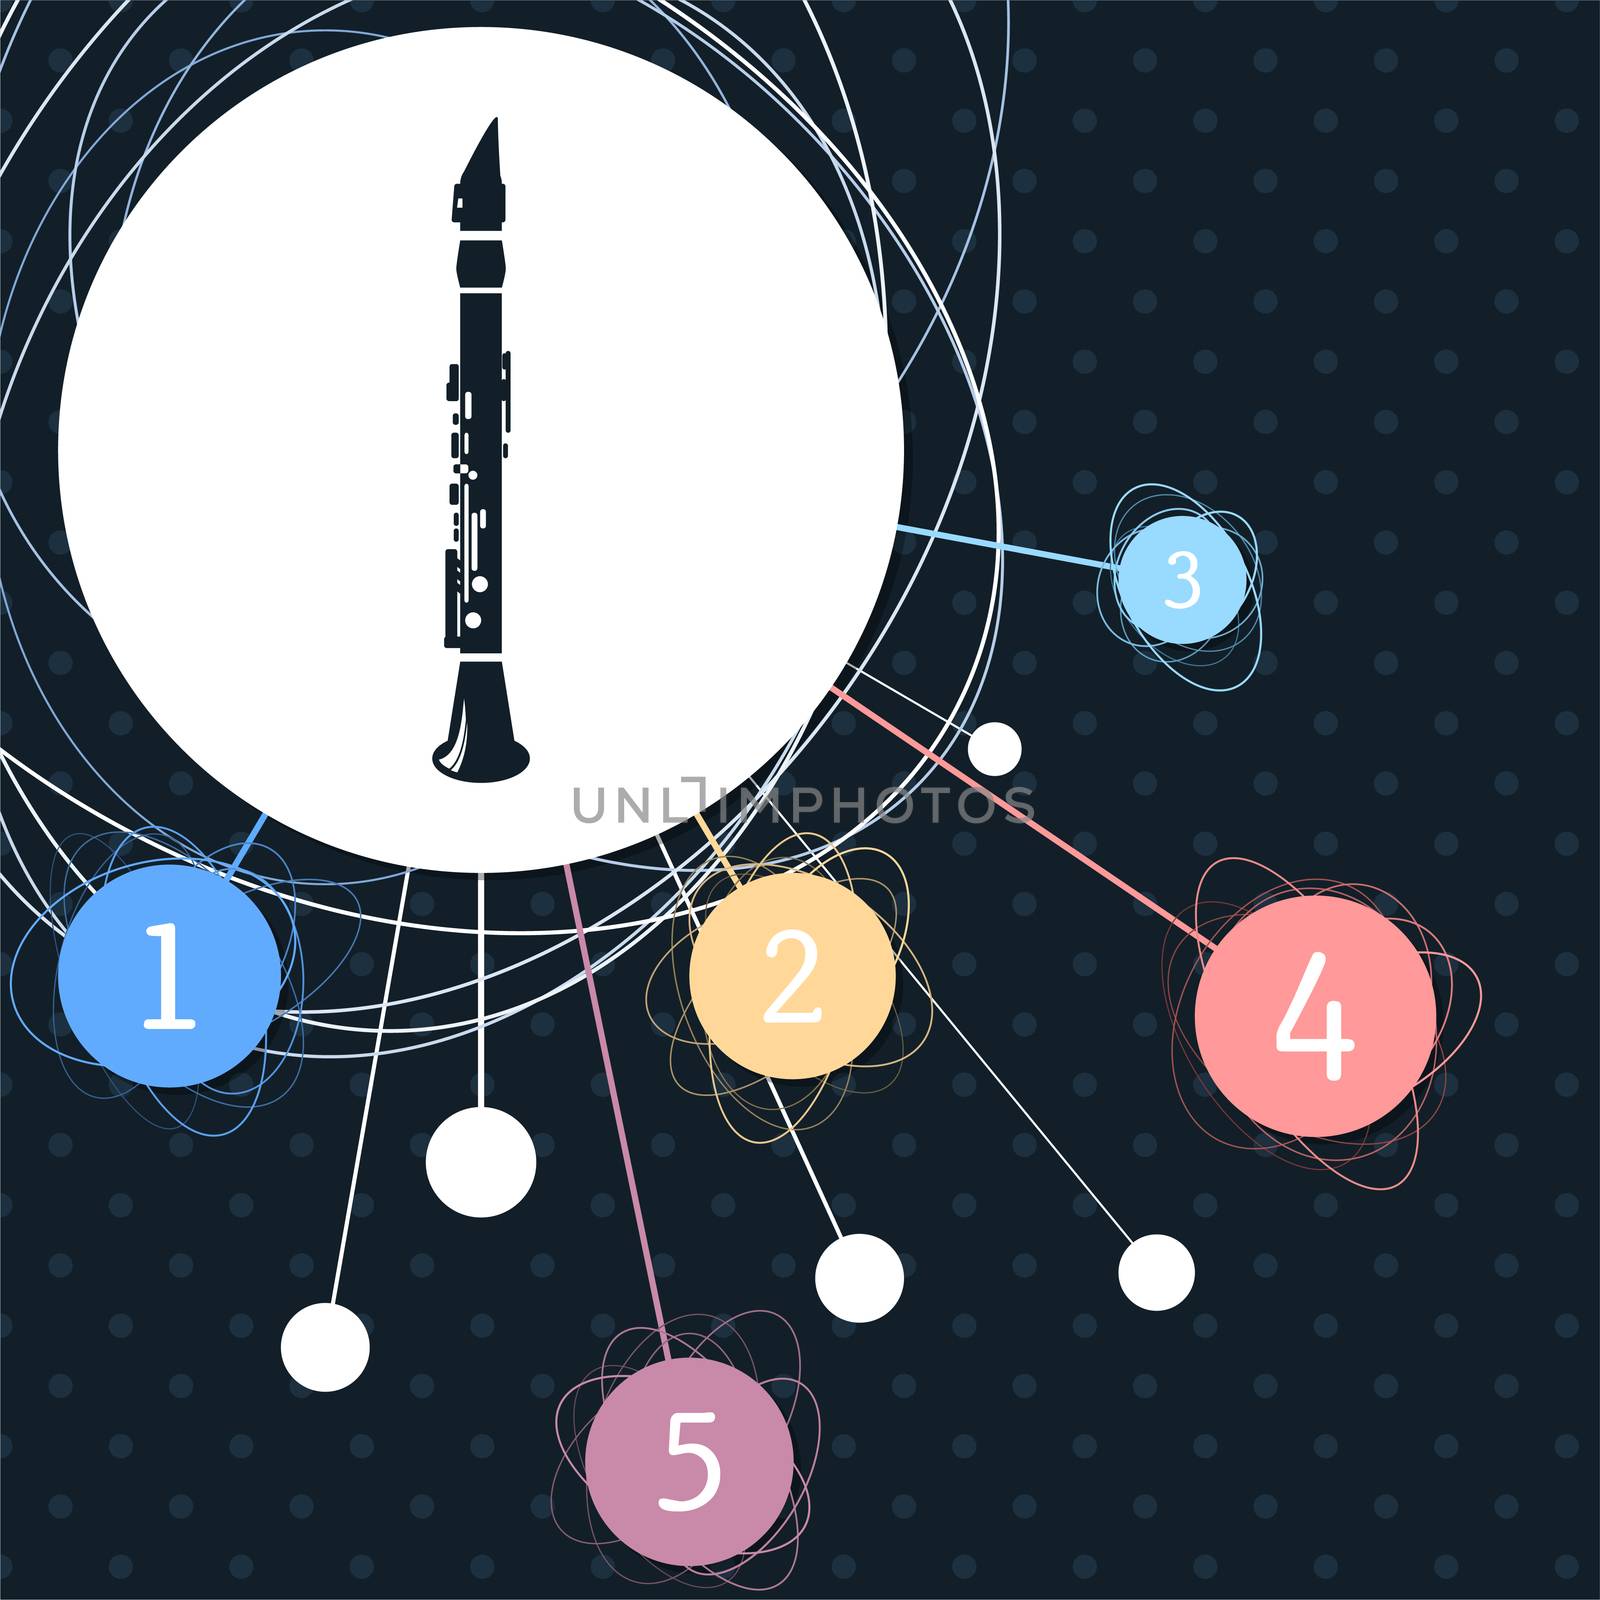 Clarinet icon with the background to the point and with infographic style. illustration